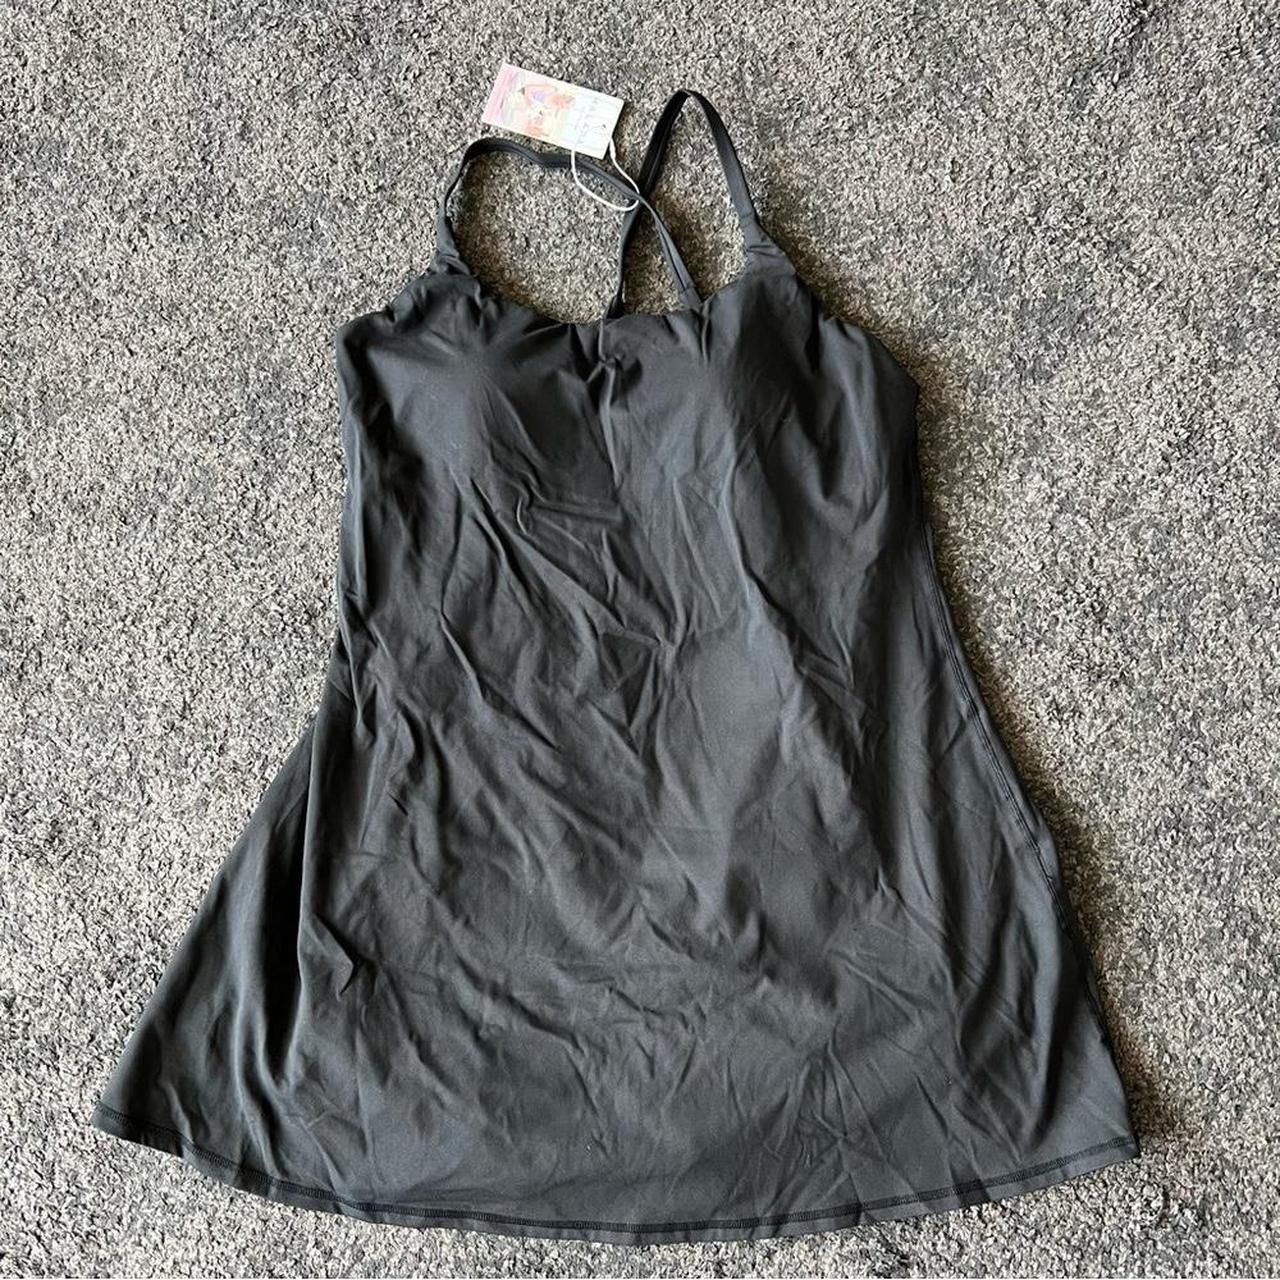 Outdoor Voices The Exercise Dress in Earl Grey - Size Small